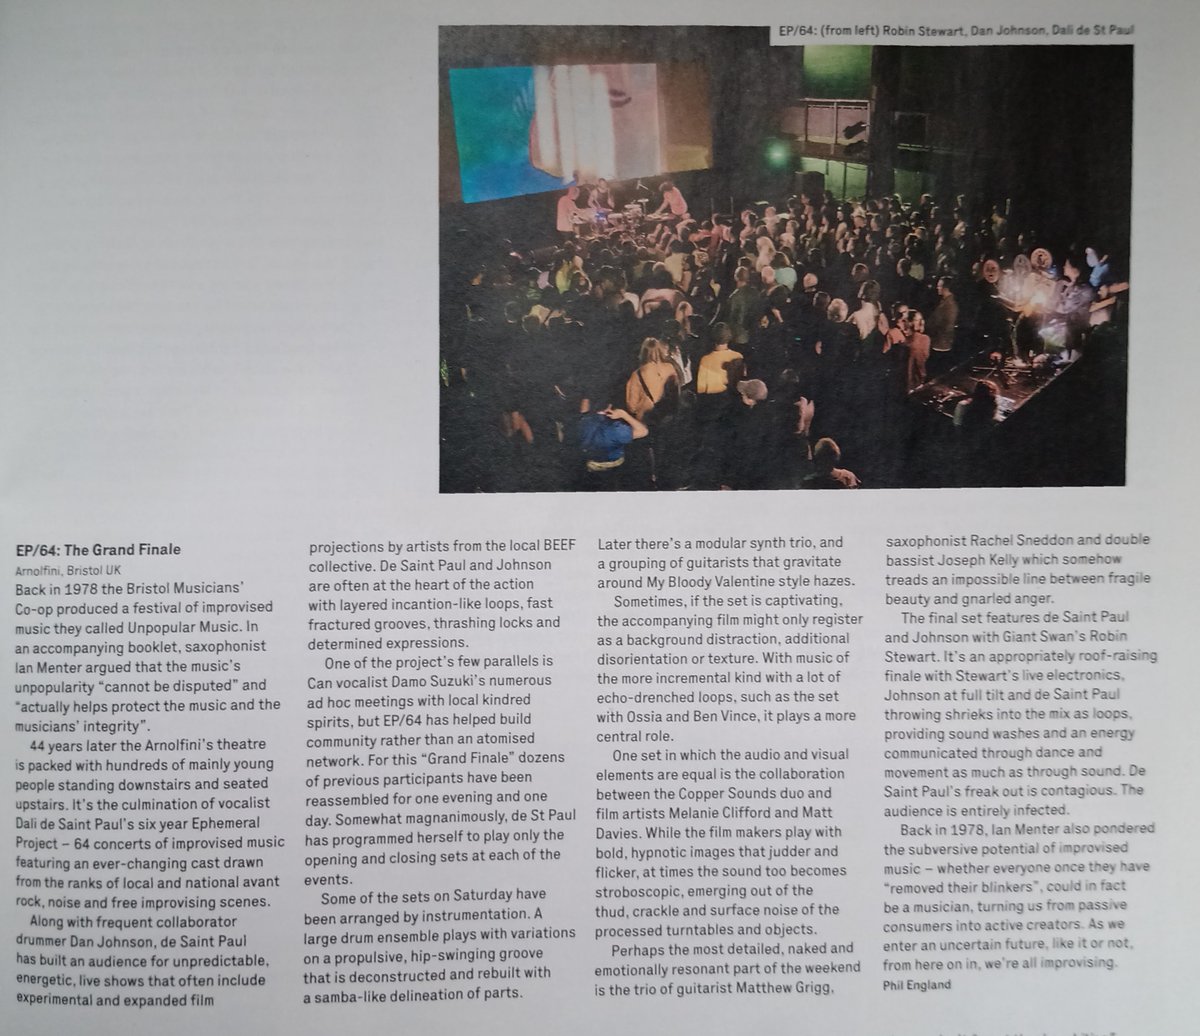 2 months ago, the end of EP/64 took place at the @ArnolfiniArts and we had a big party to say farewell! Reading the excellent words of Phil England about this crazy weekend in @thewiremagazine and feeling blessed